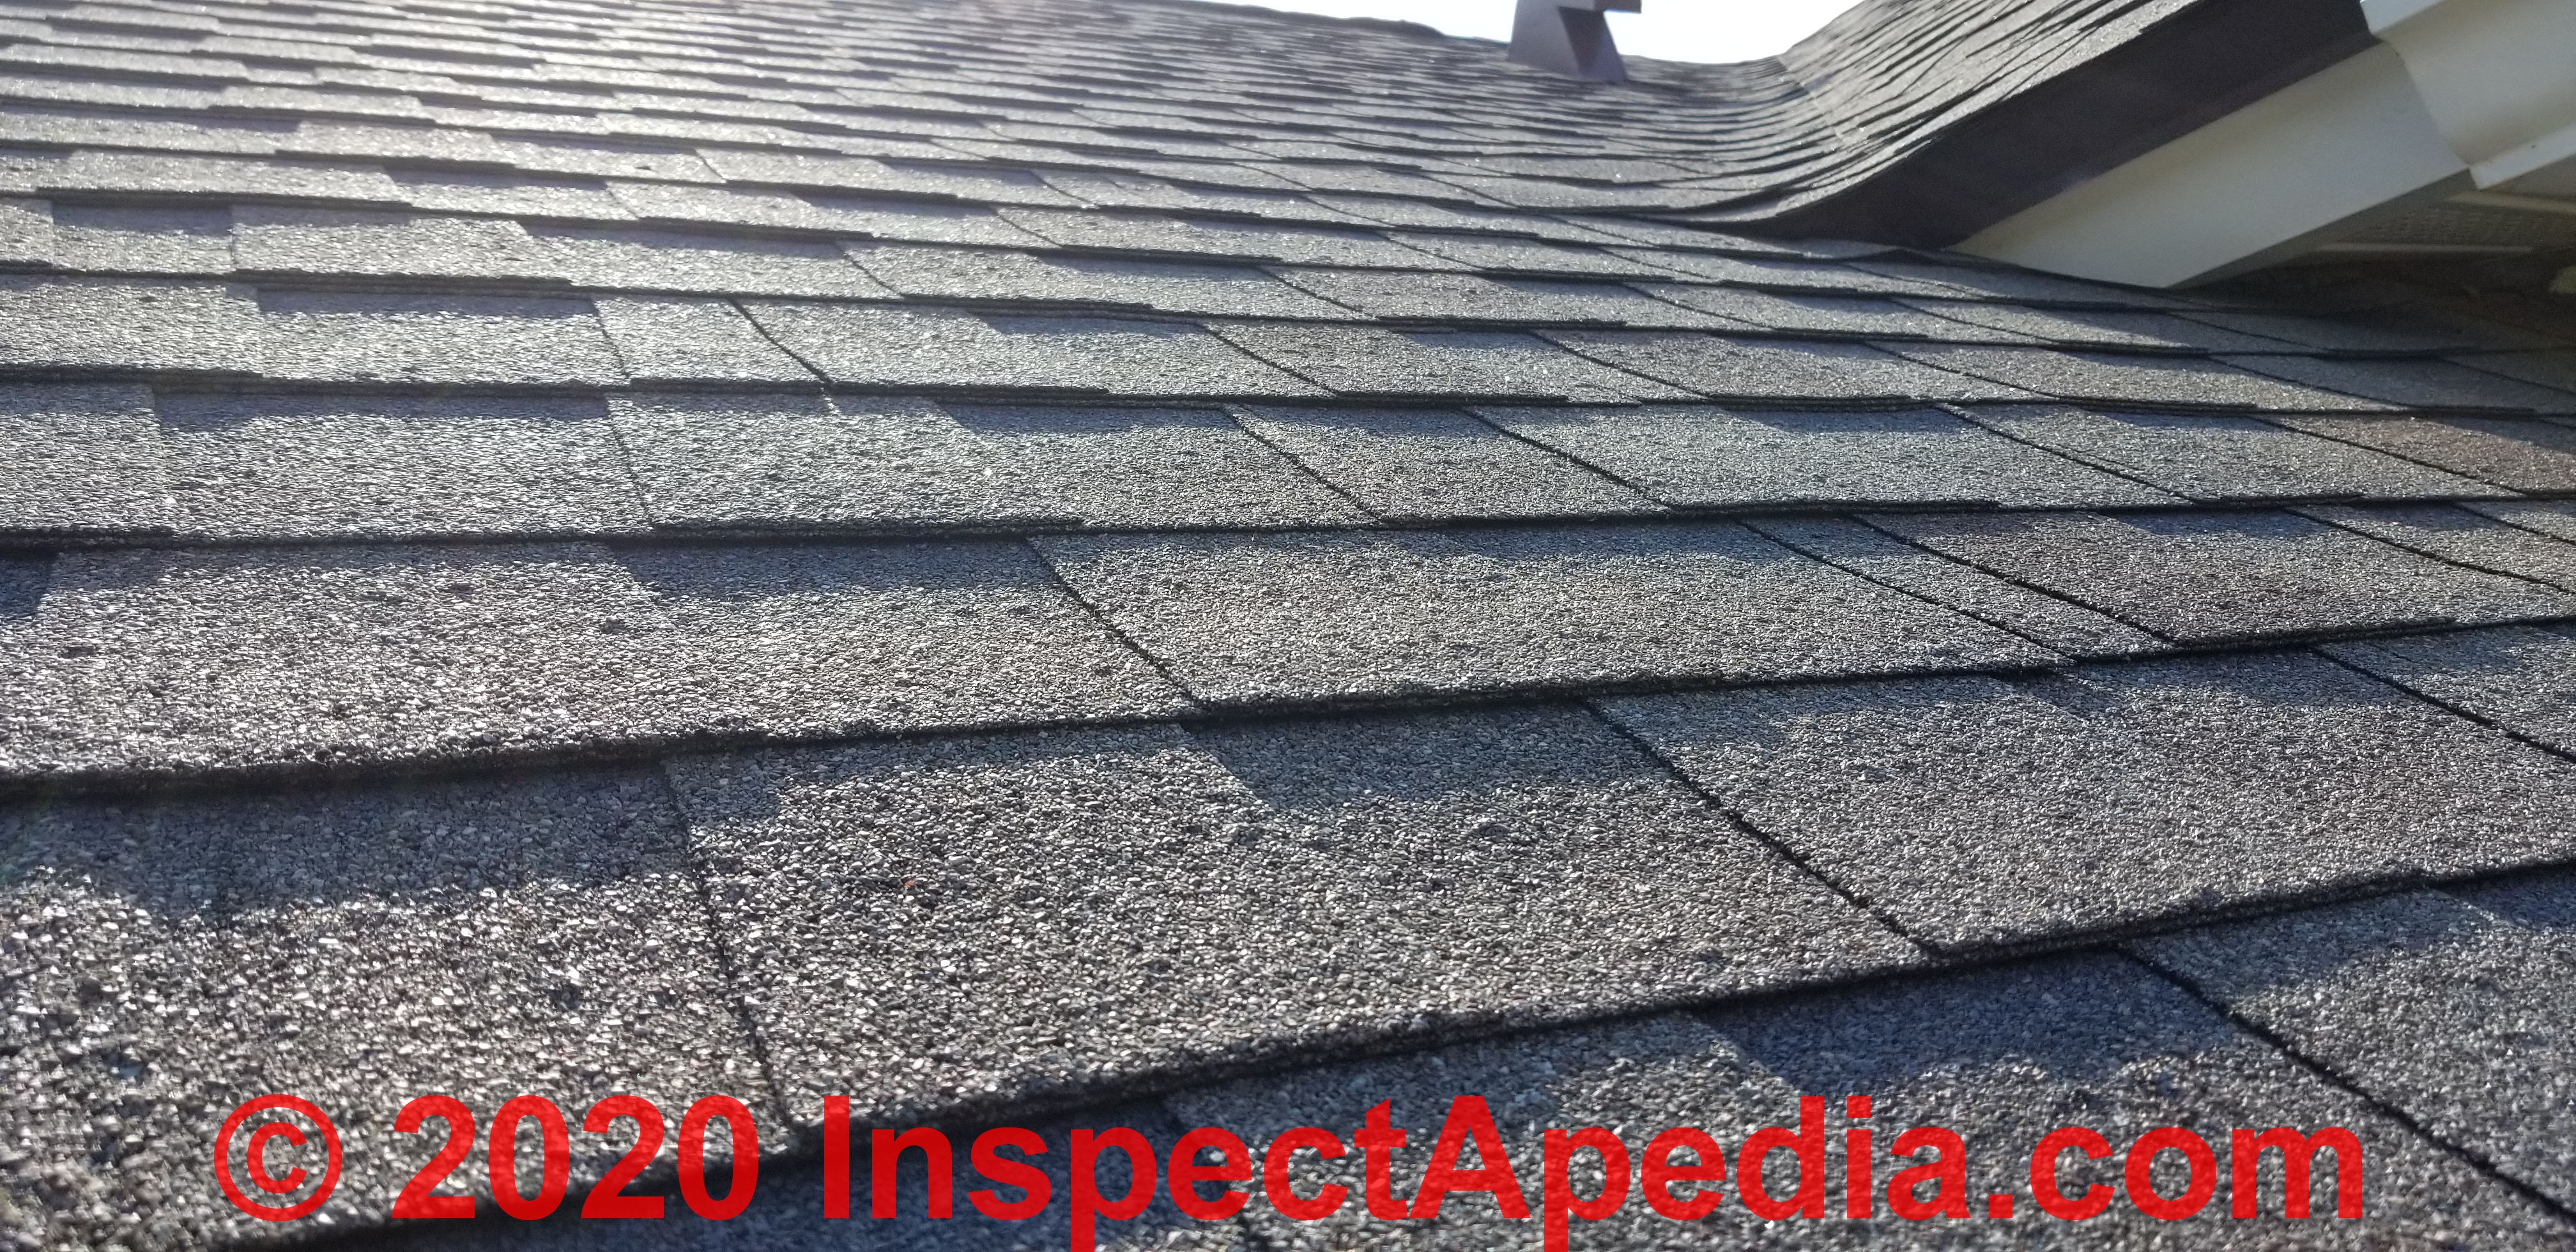 Blistered Asphalt Roof Shingles Shingle Rash Blisters As A Product Defect Versus Storm Damage And Other Defects Photos And Text Guide To The Diagnosis Of Asphalt Roof Failures How To